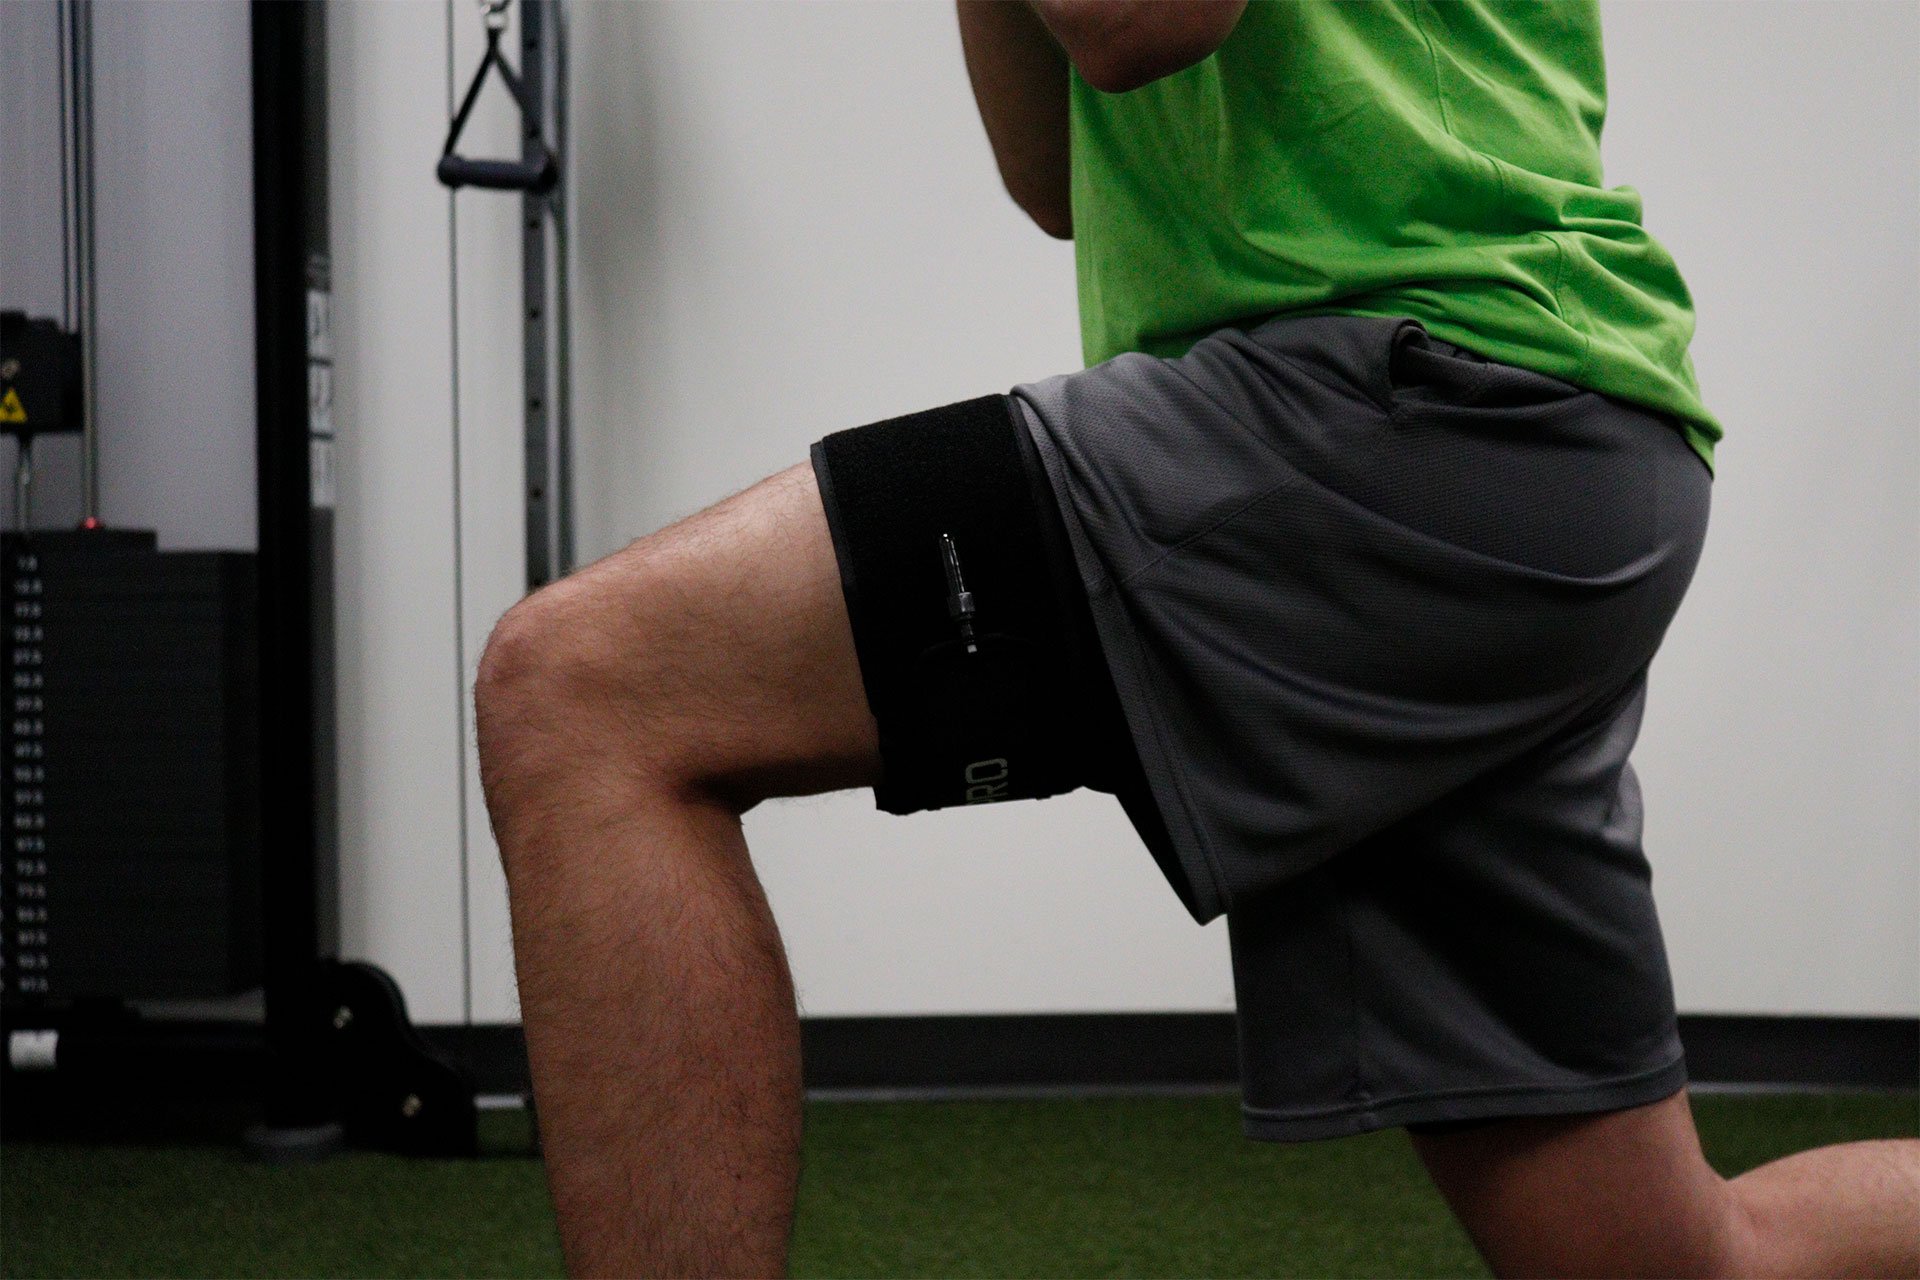 What is Blood Flow Restriction Training?